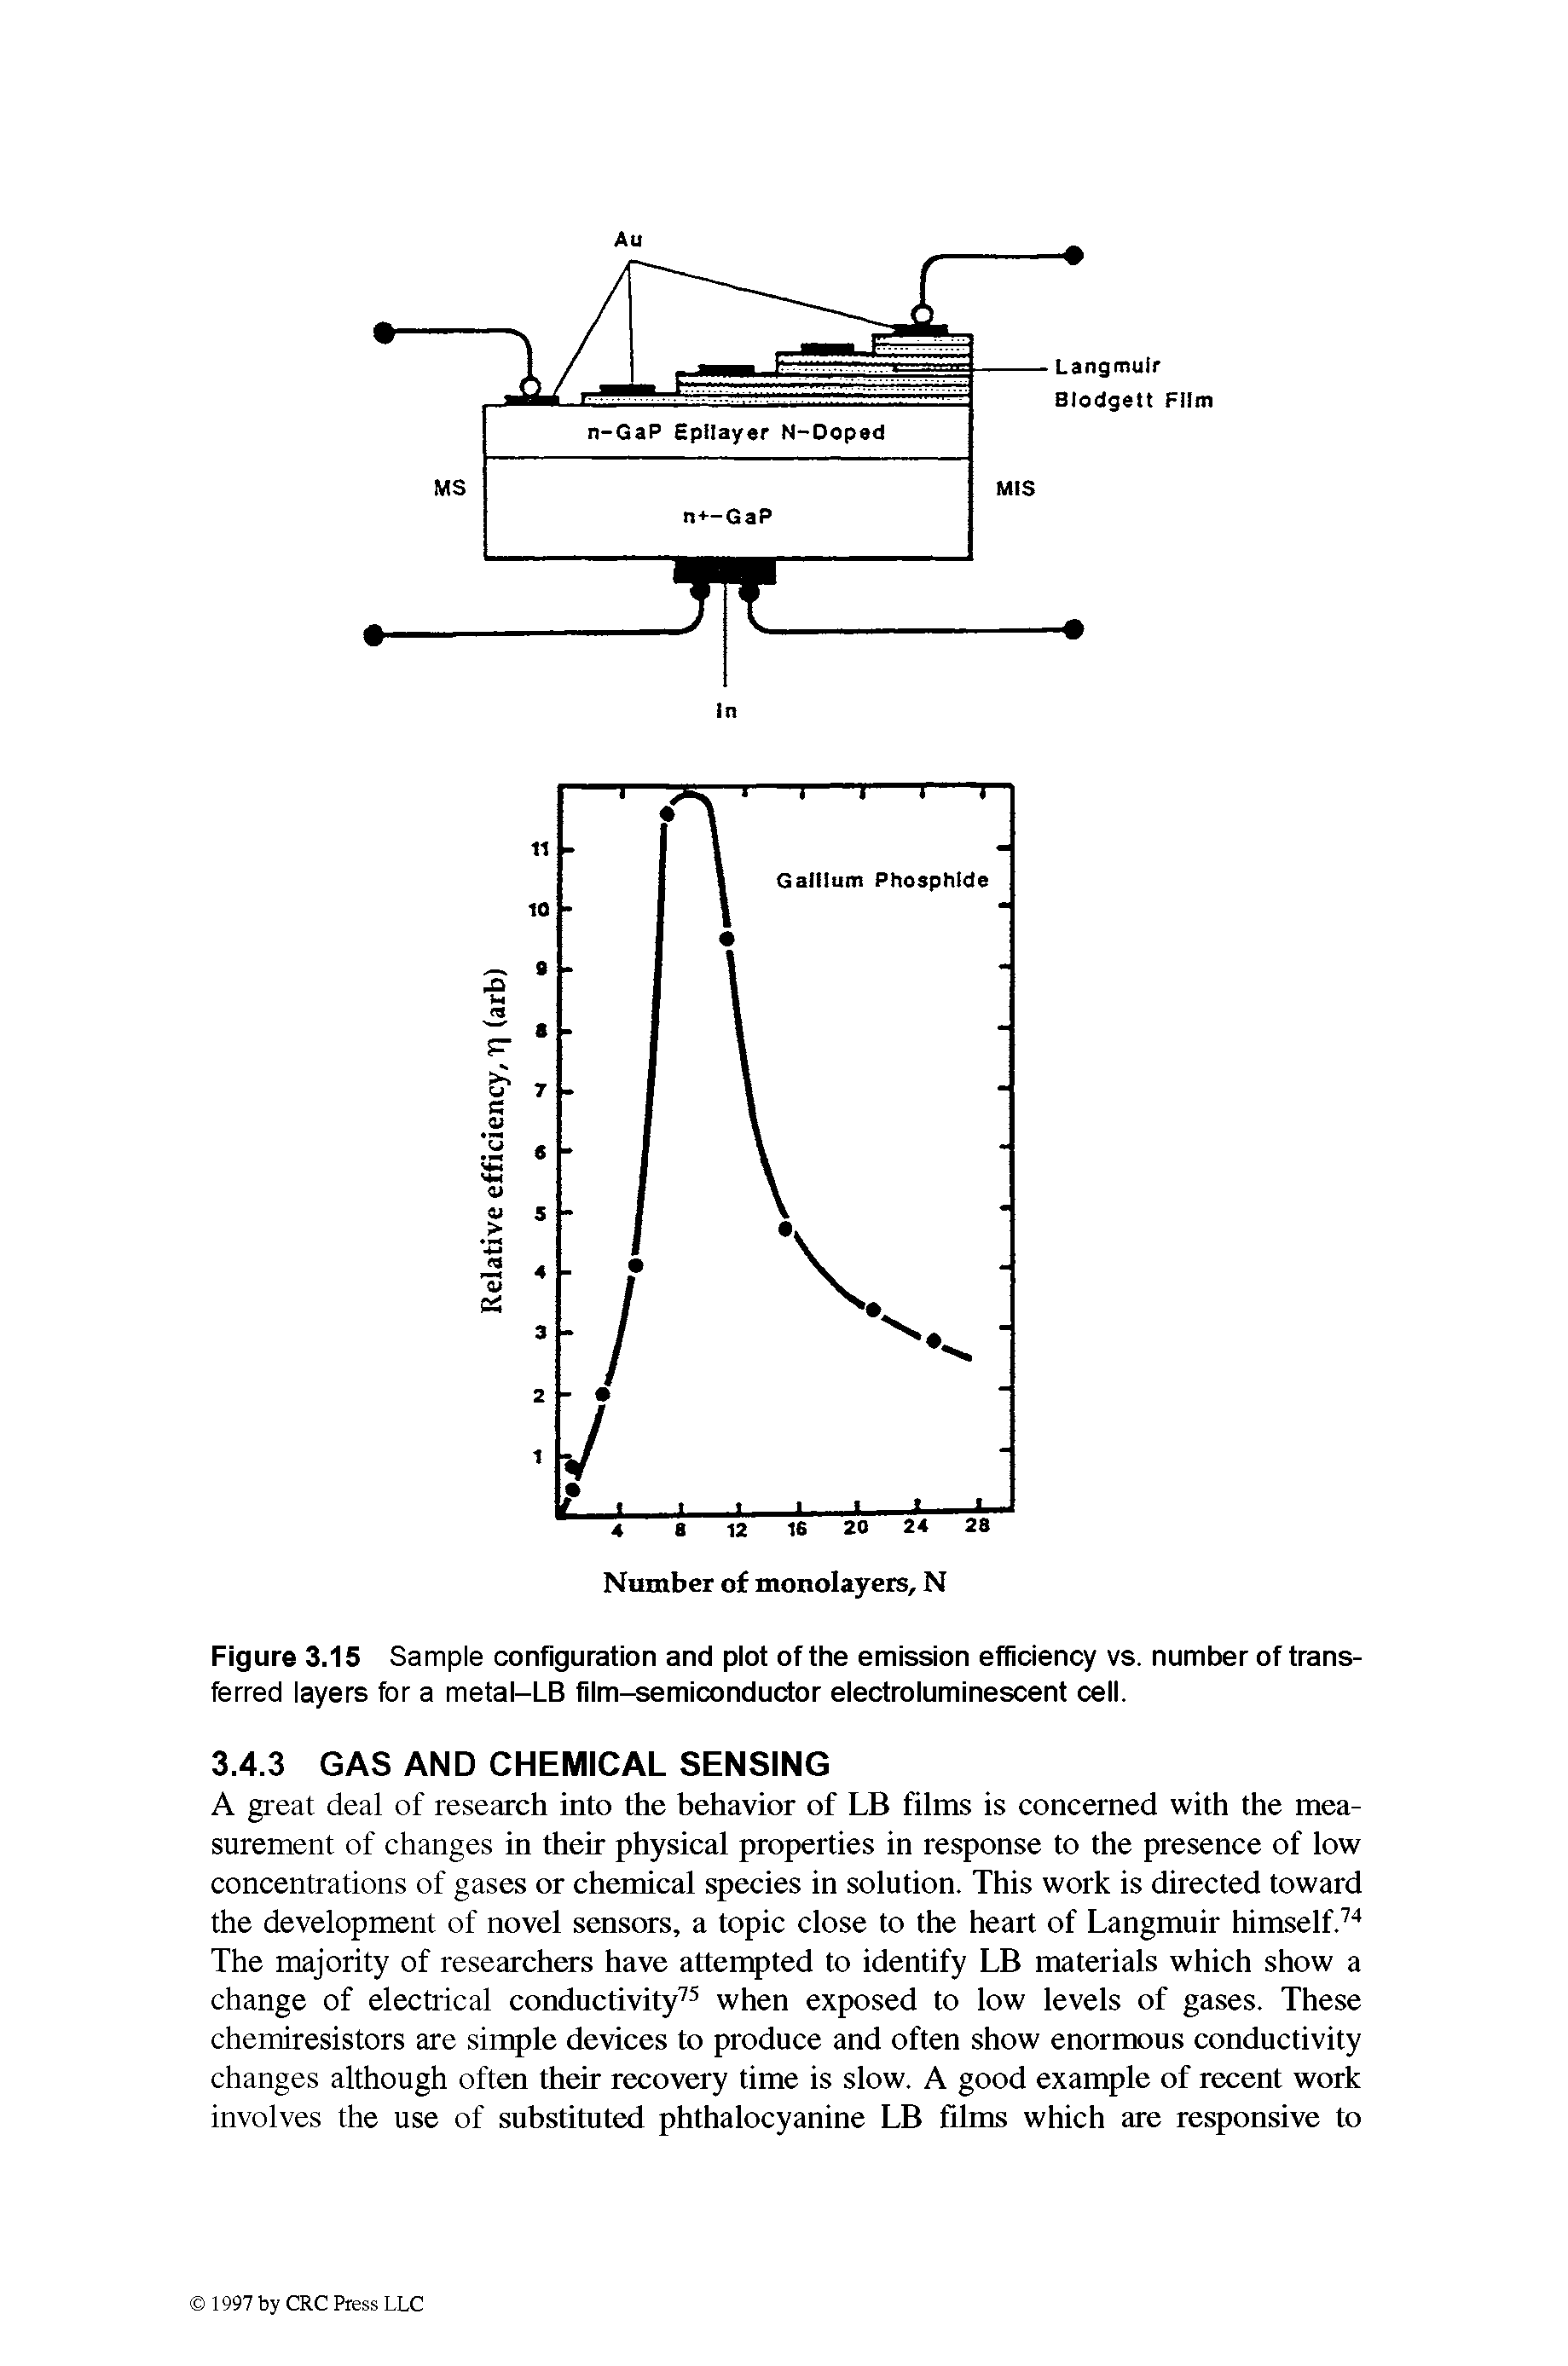 Figure 3.15 Sample configuration and plot of the emission efficiency vs. number of transferred layers for a metal-LB film-semiconductor electroluminescent cell.